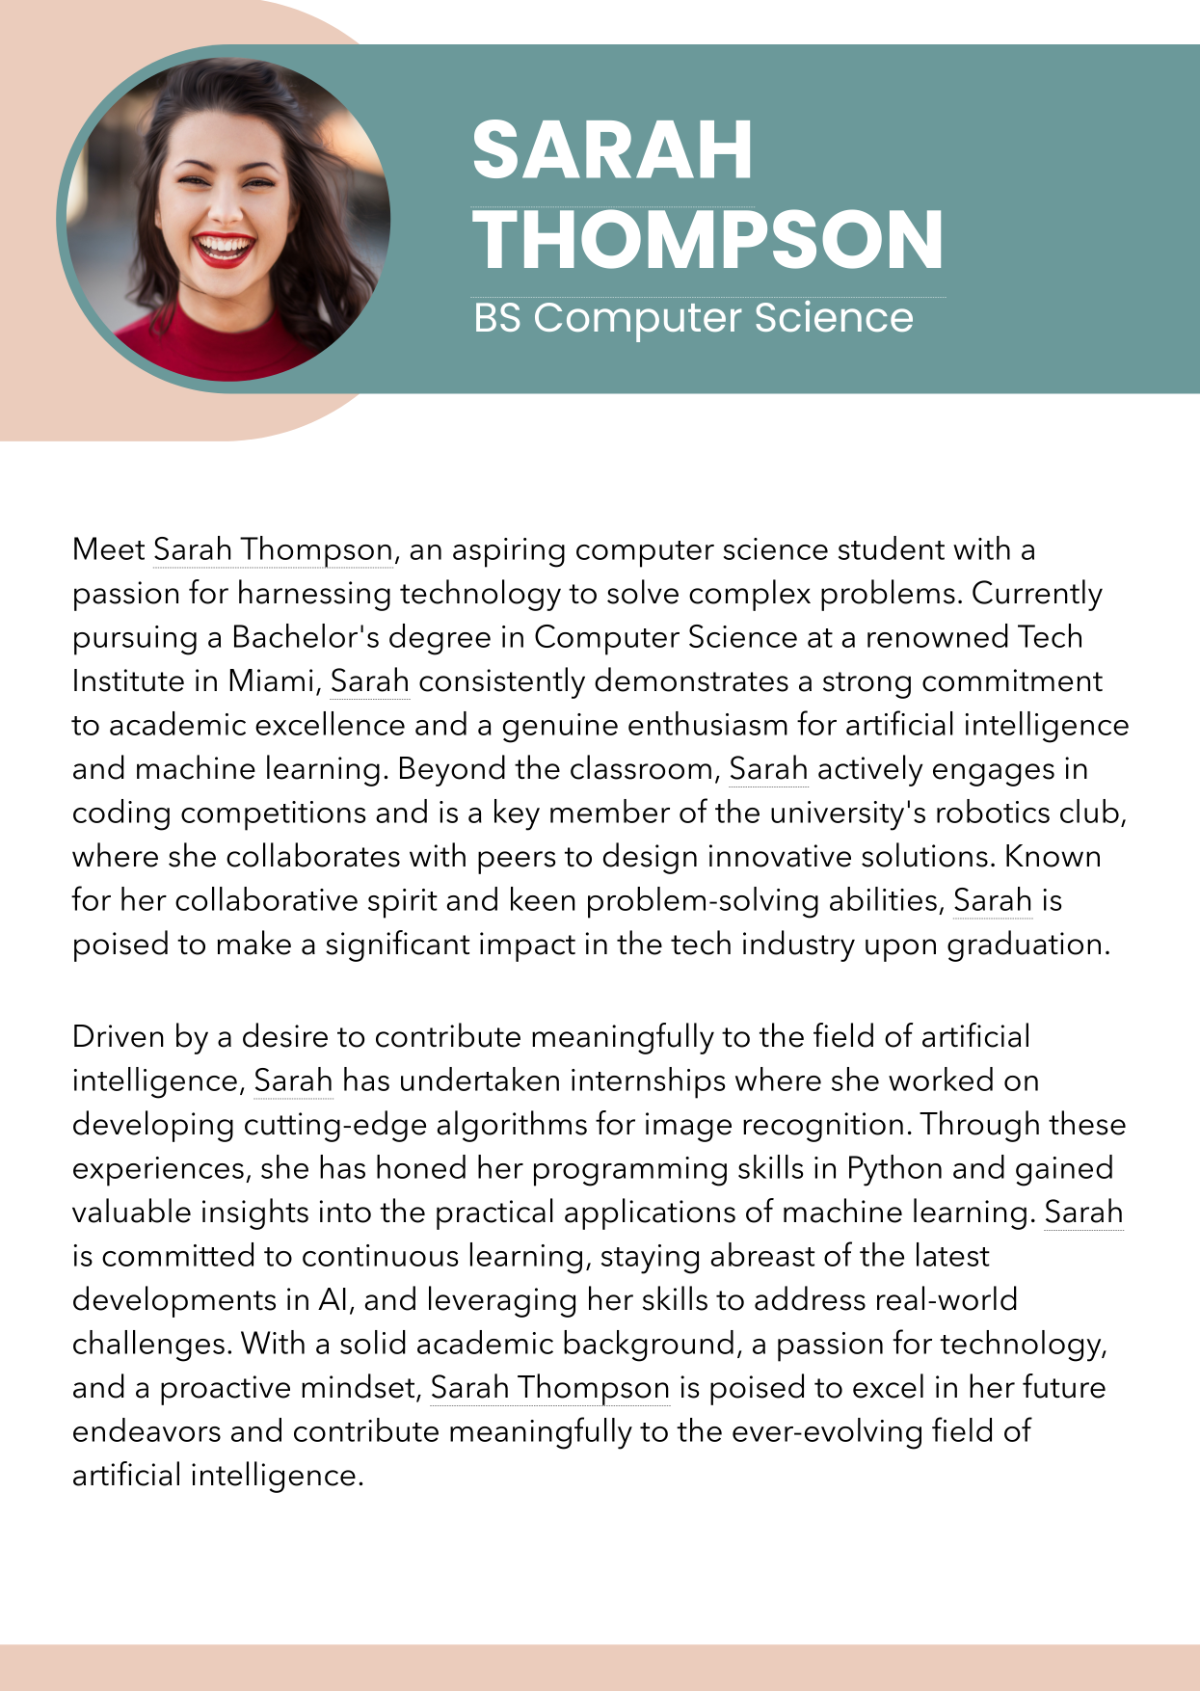 Free Professional Bio for College Student Template